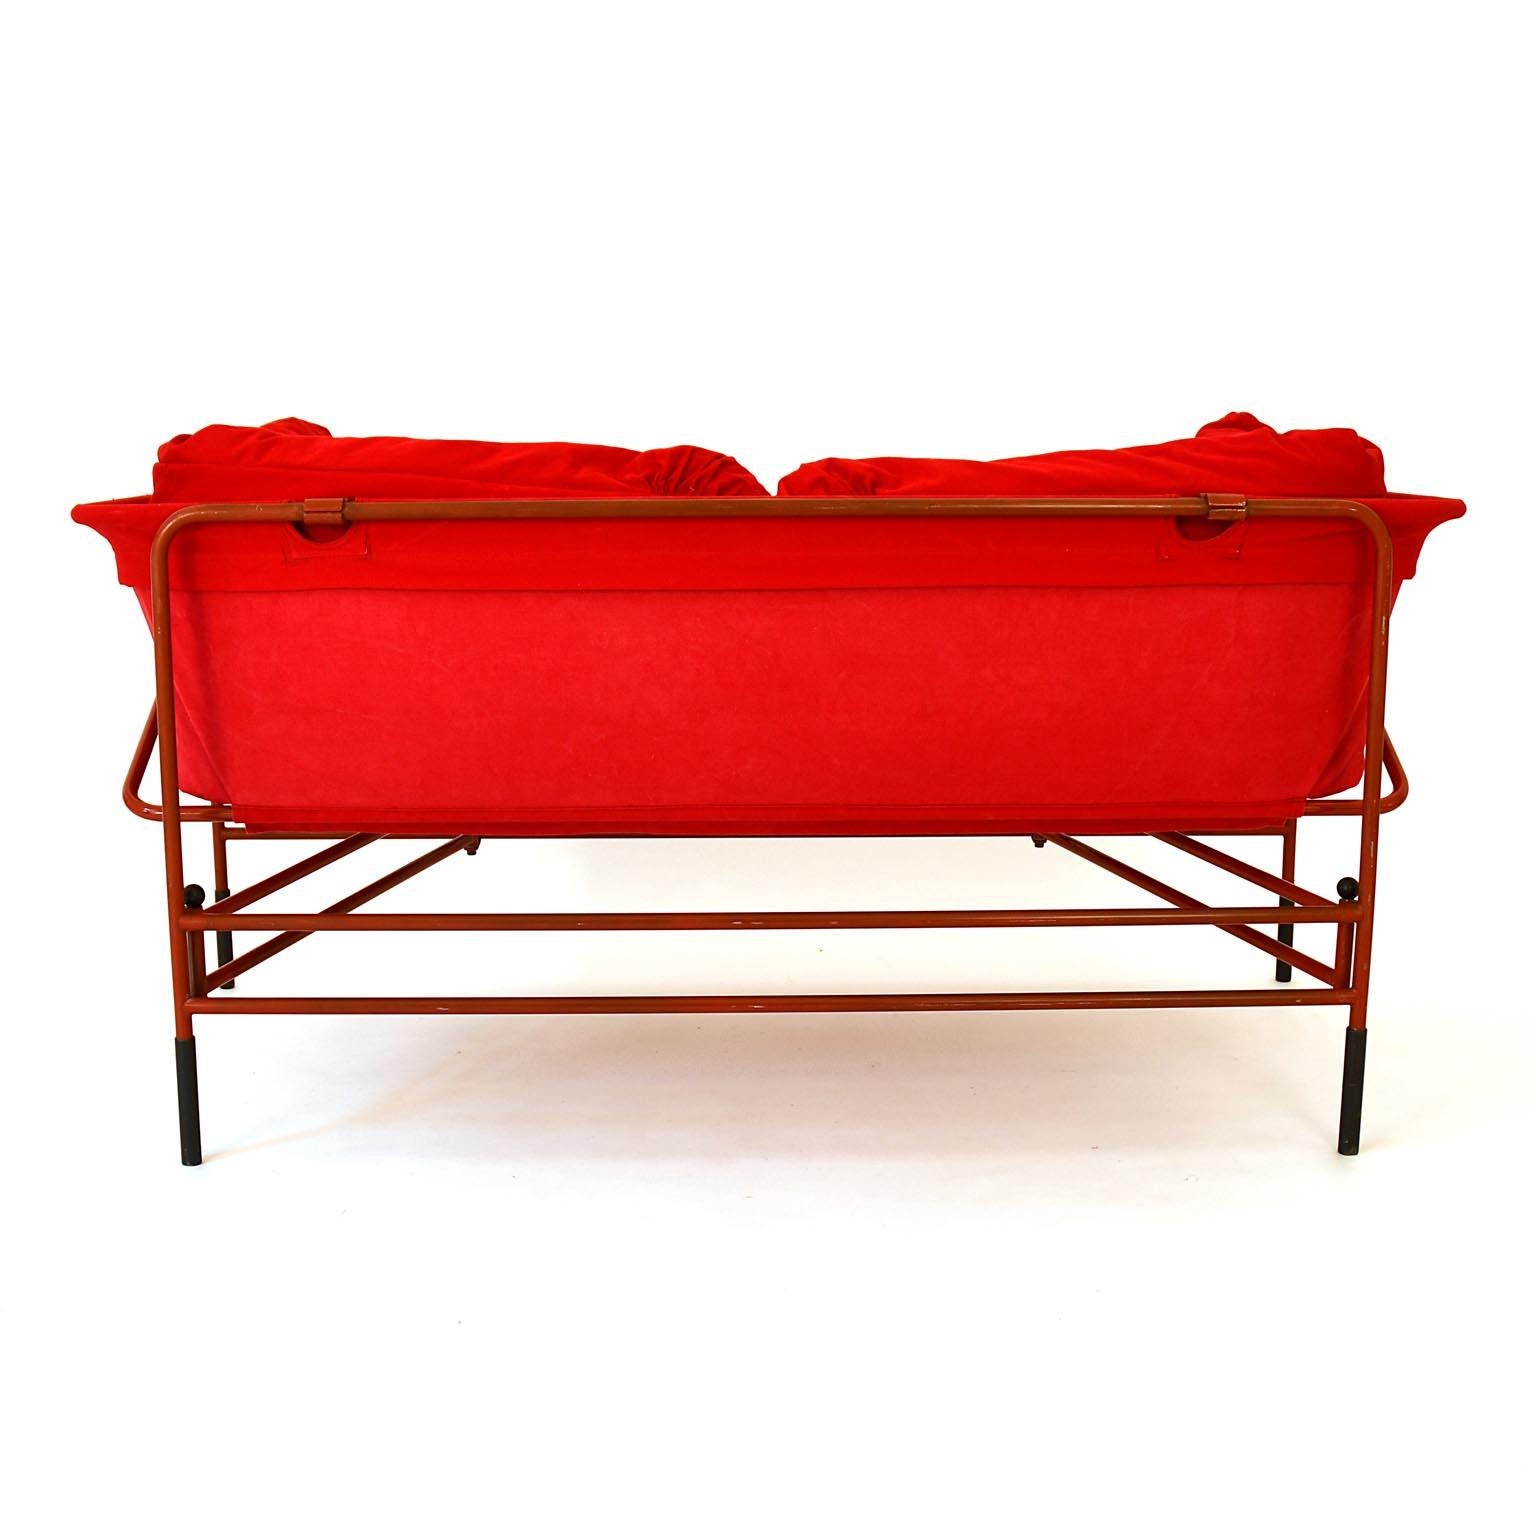 Bench Cabriolet 1980s Red Fabrik Metal Bruno Rota Italy 2